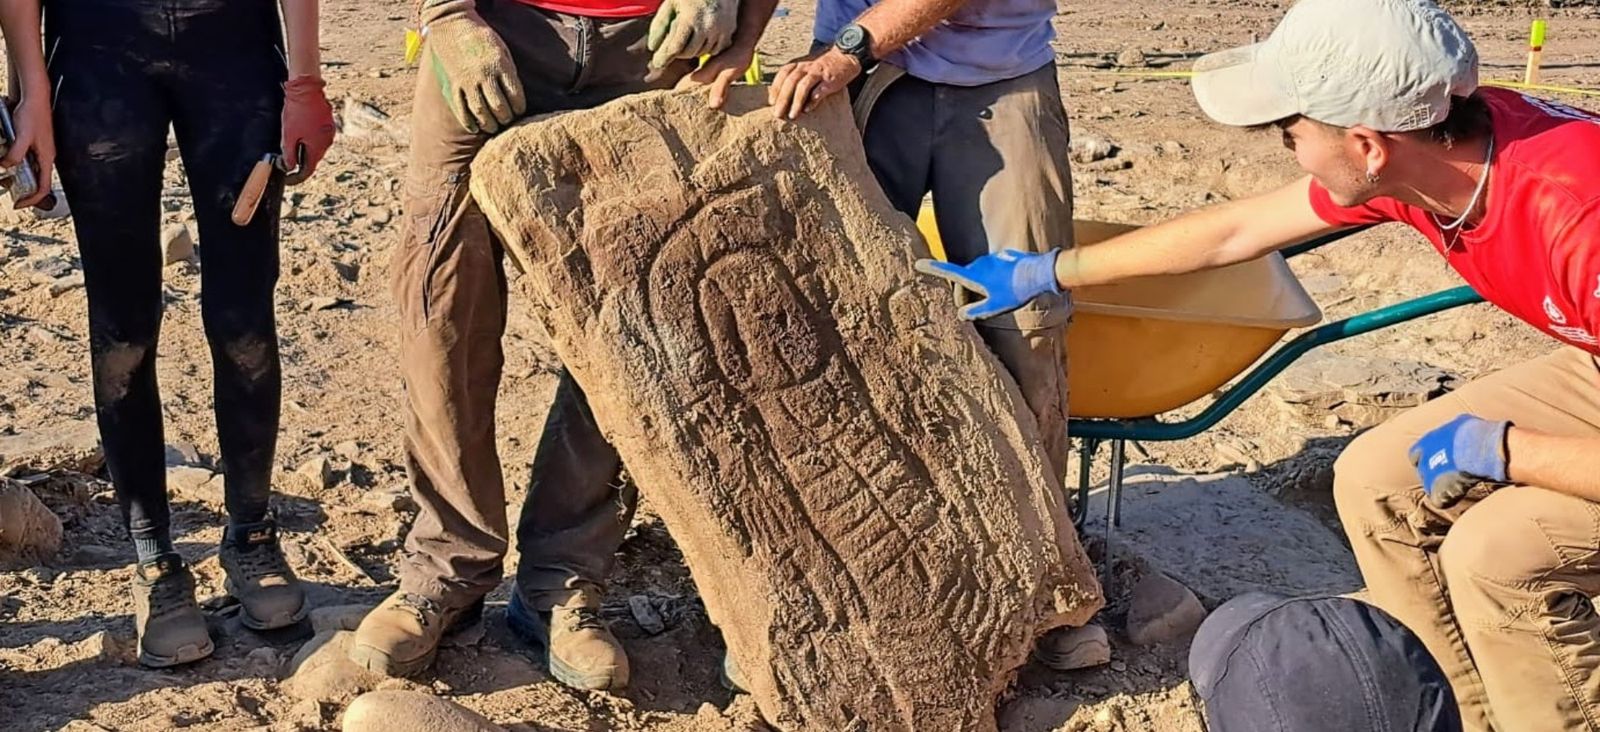 This 3,000-Year-Old Stone Slab Found in Spain Is Upending Ideas About Ancient Gender Roles